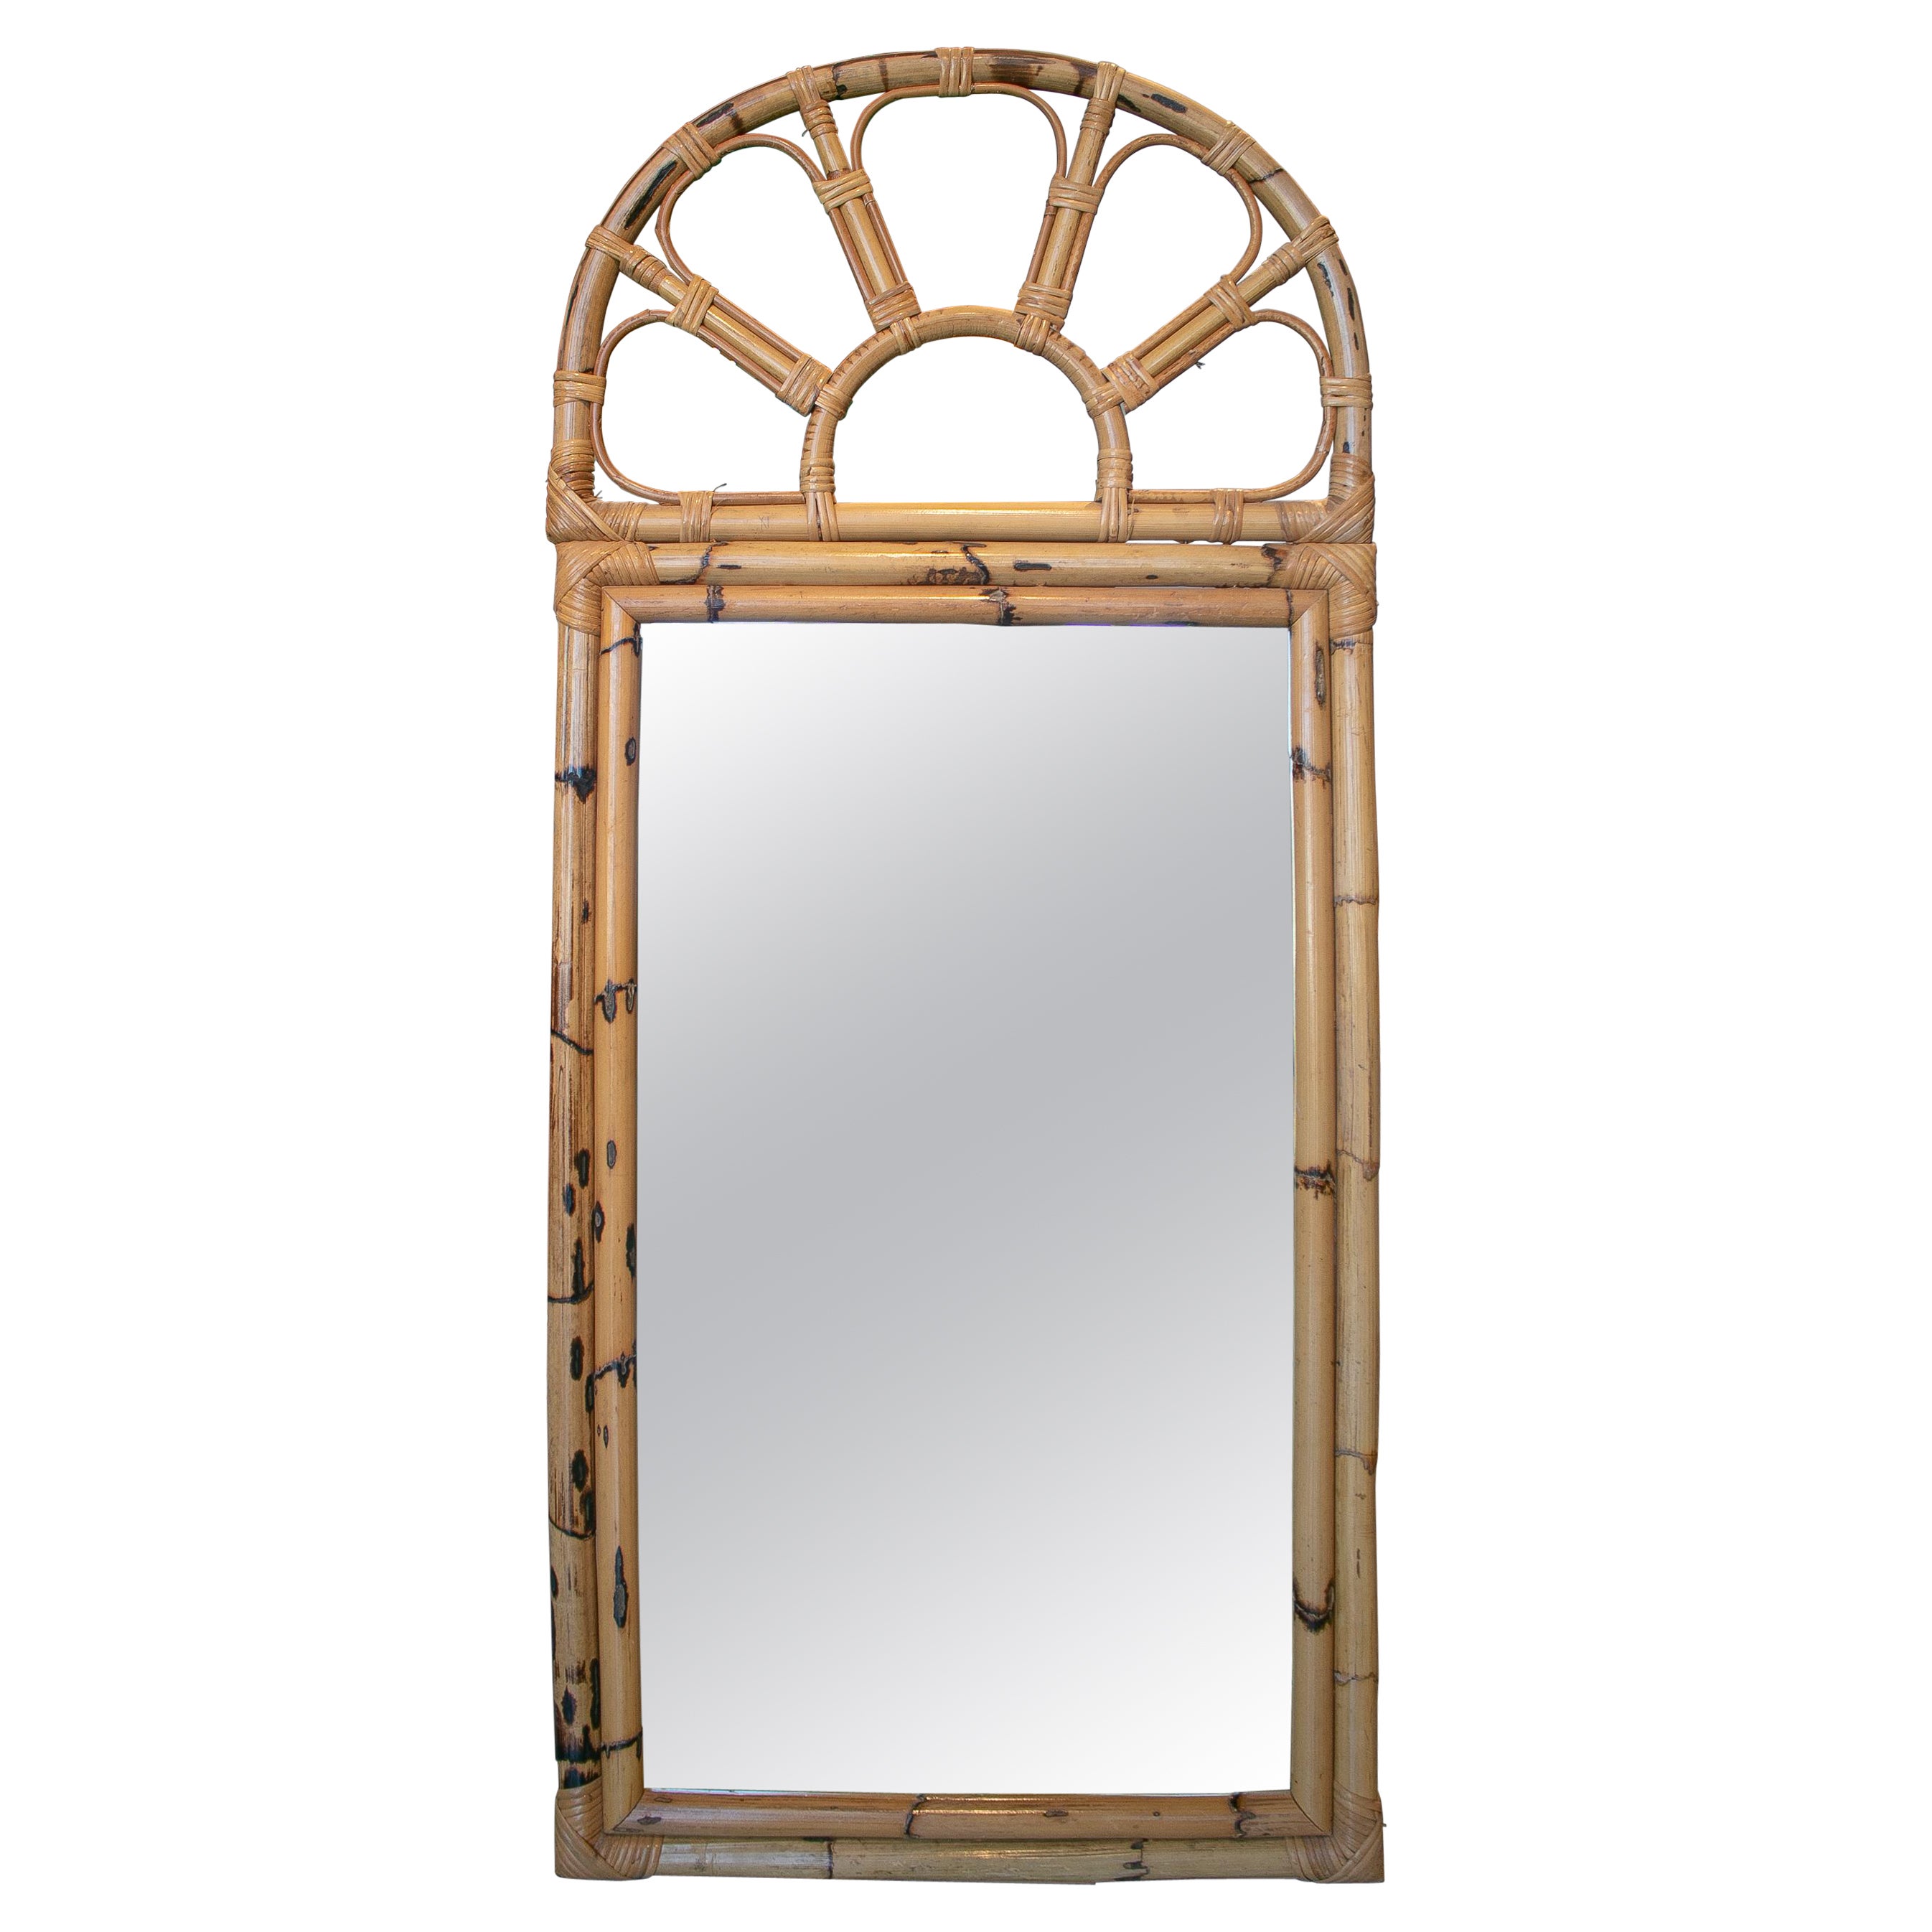 1970s Spanish Handcrafted Bamboo Wall Mirror For Sale